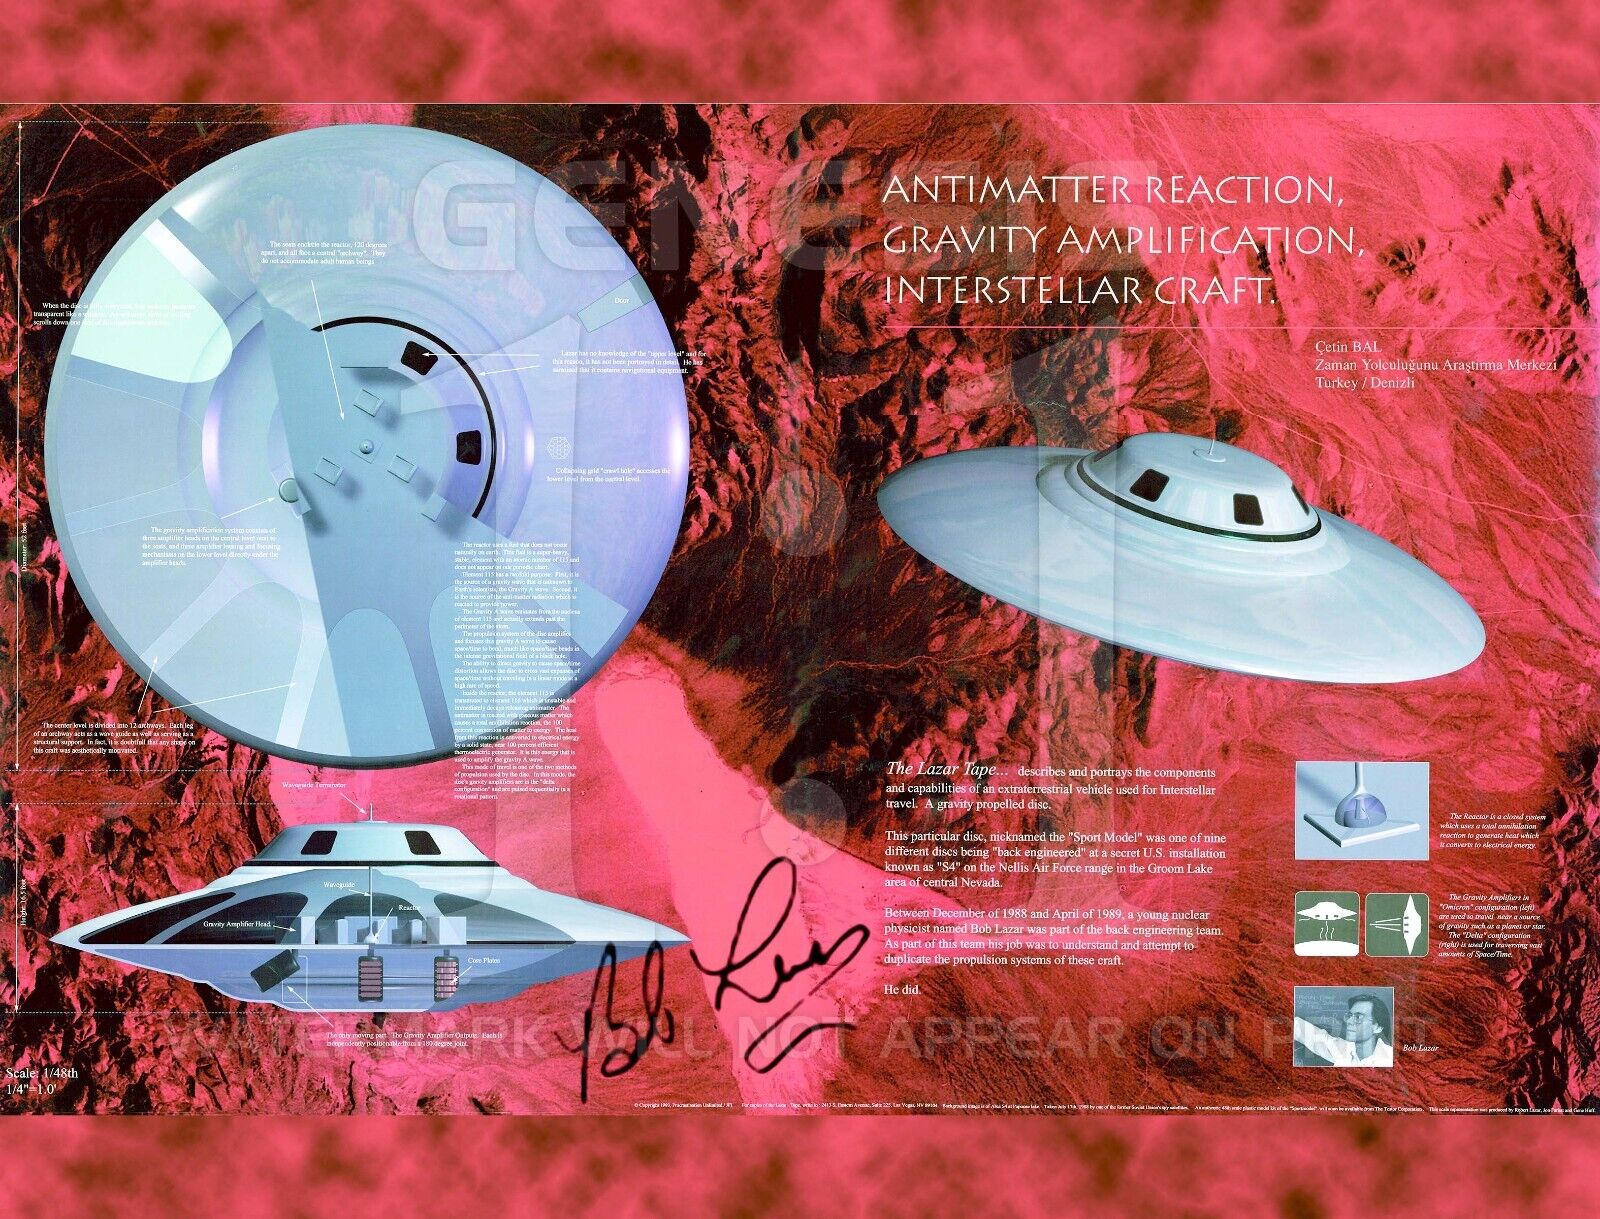 UFO SIGNED PHOTO 8.5X11 AREA 51 BOB LAZAR AUTOGRAPH FLYING SAUCER POSTER REPRINT